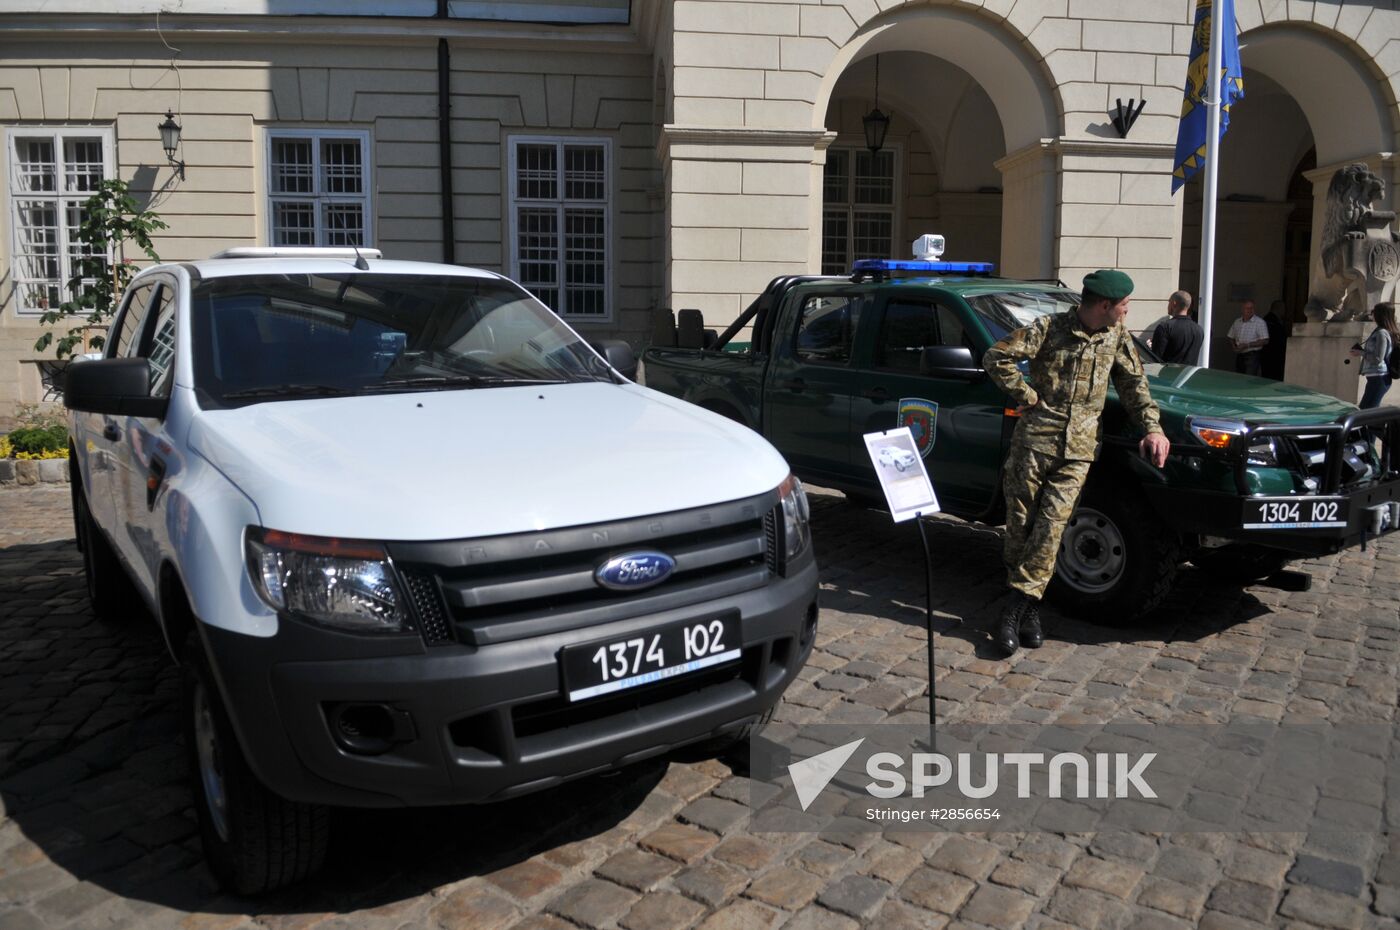 Display of equipment used by Ukrainian border guards